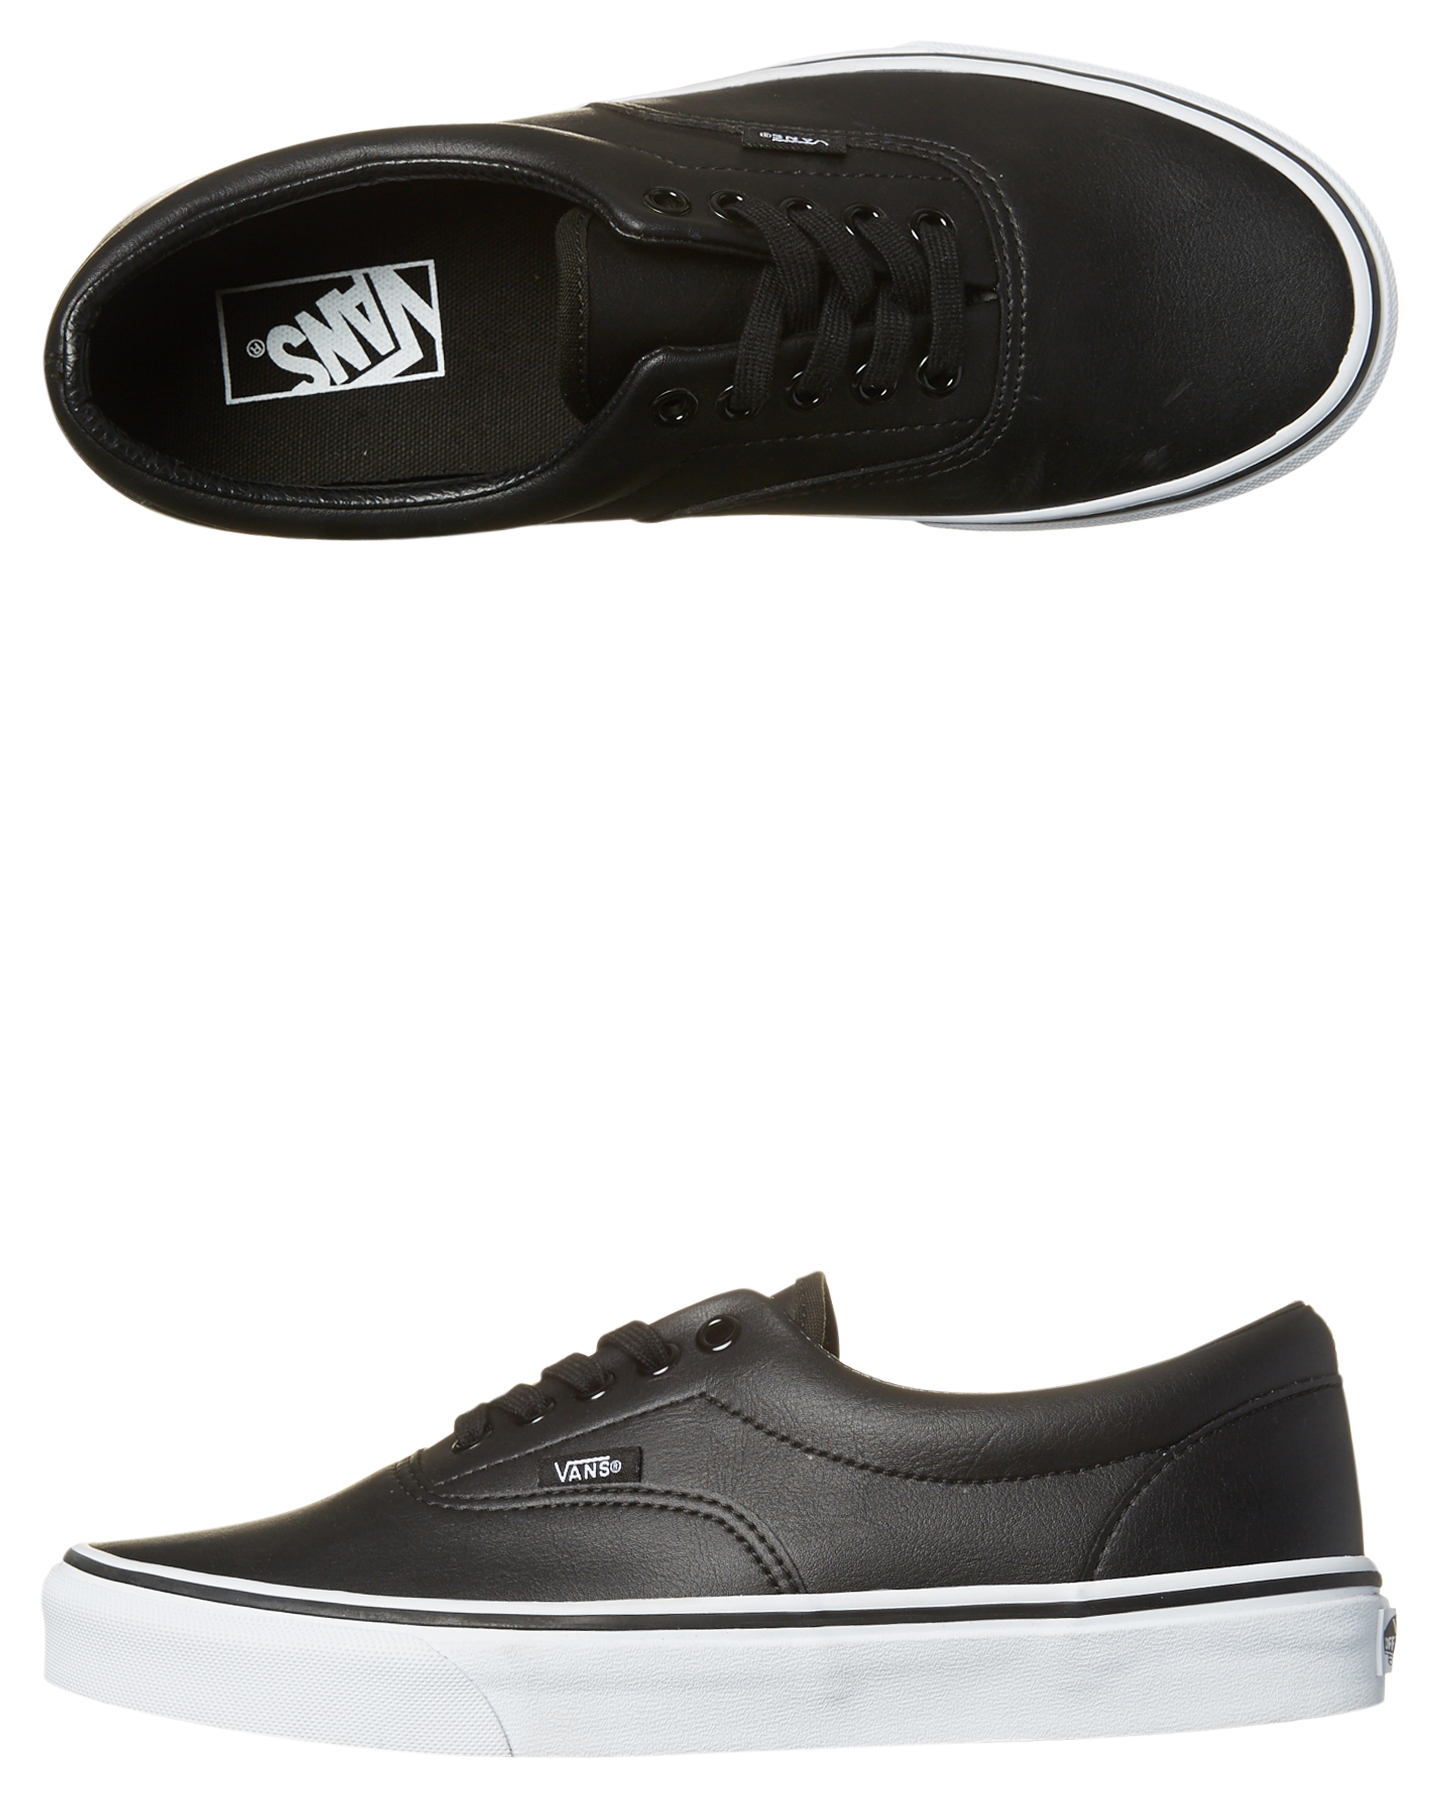 vans black and white leather shoes